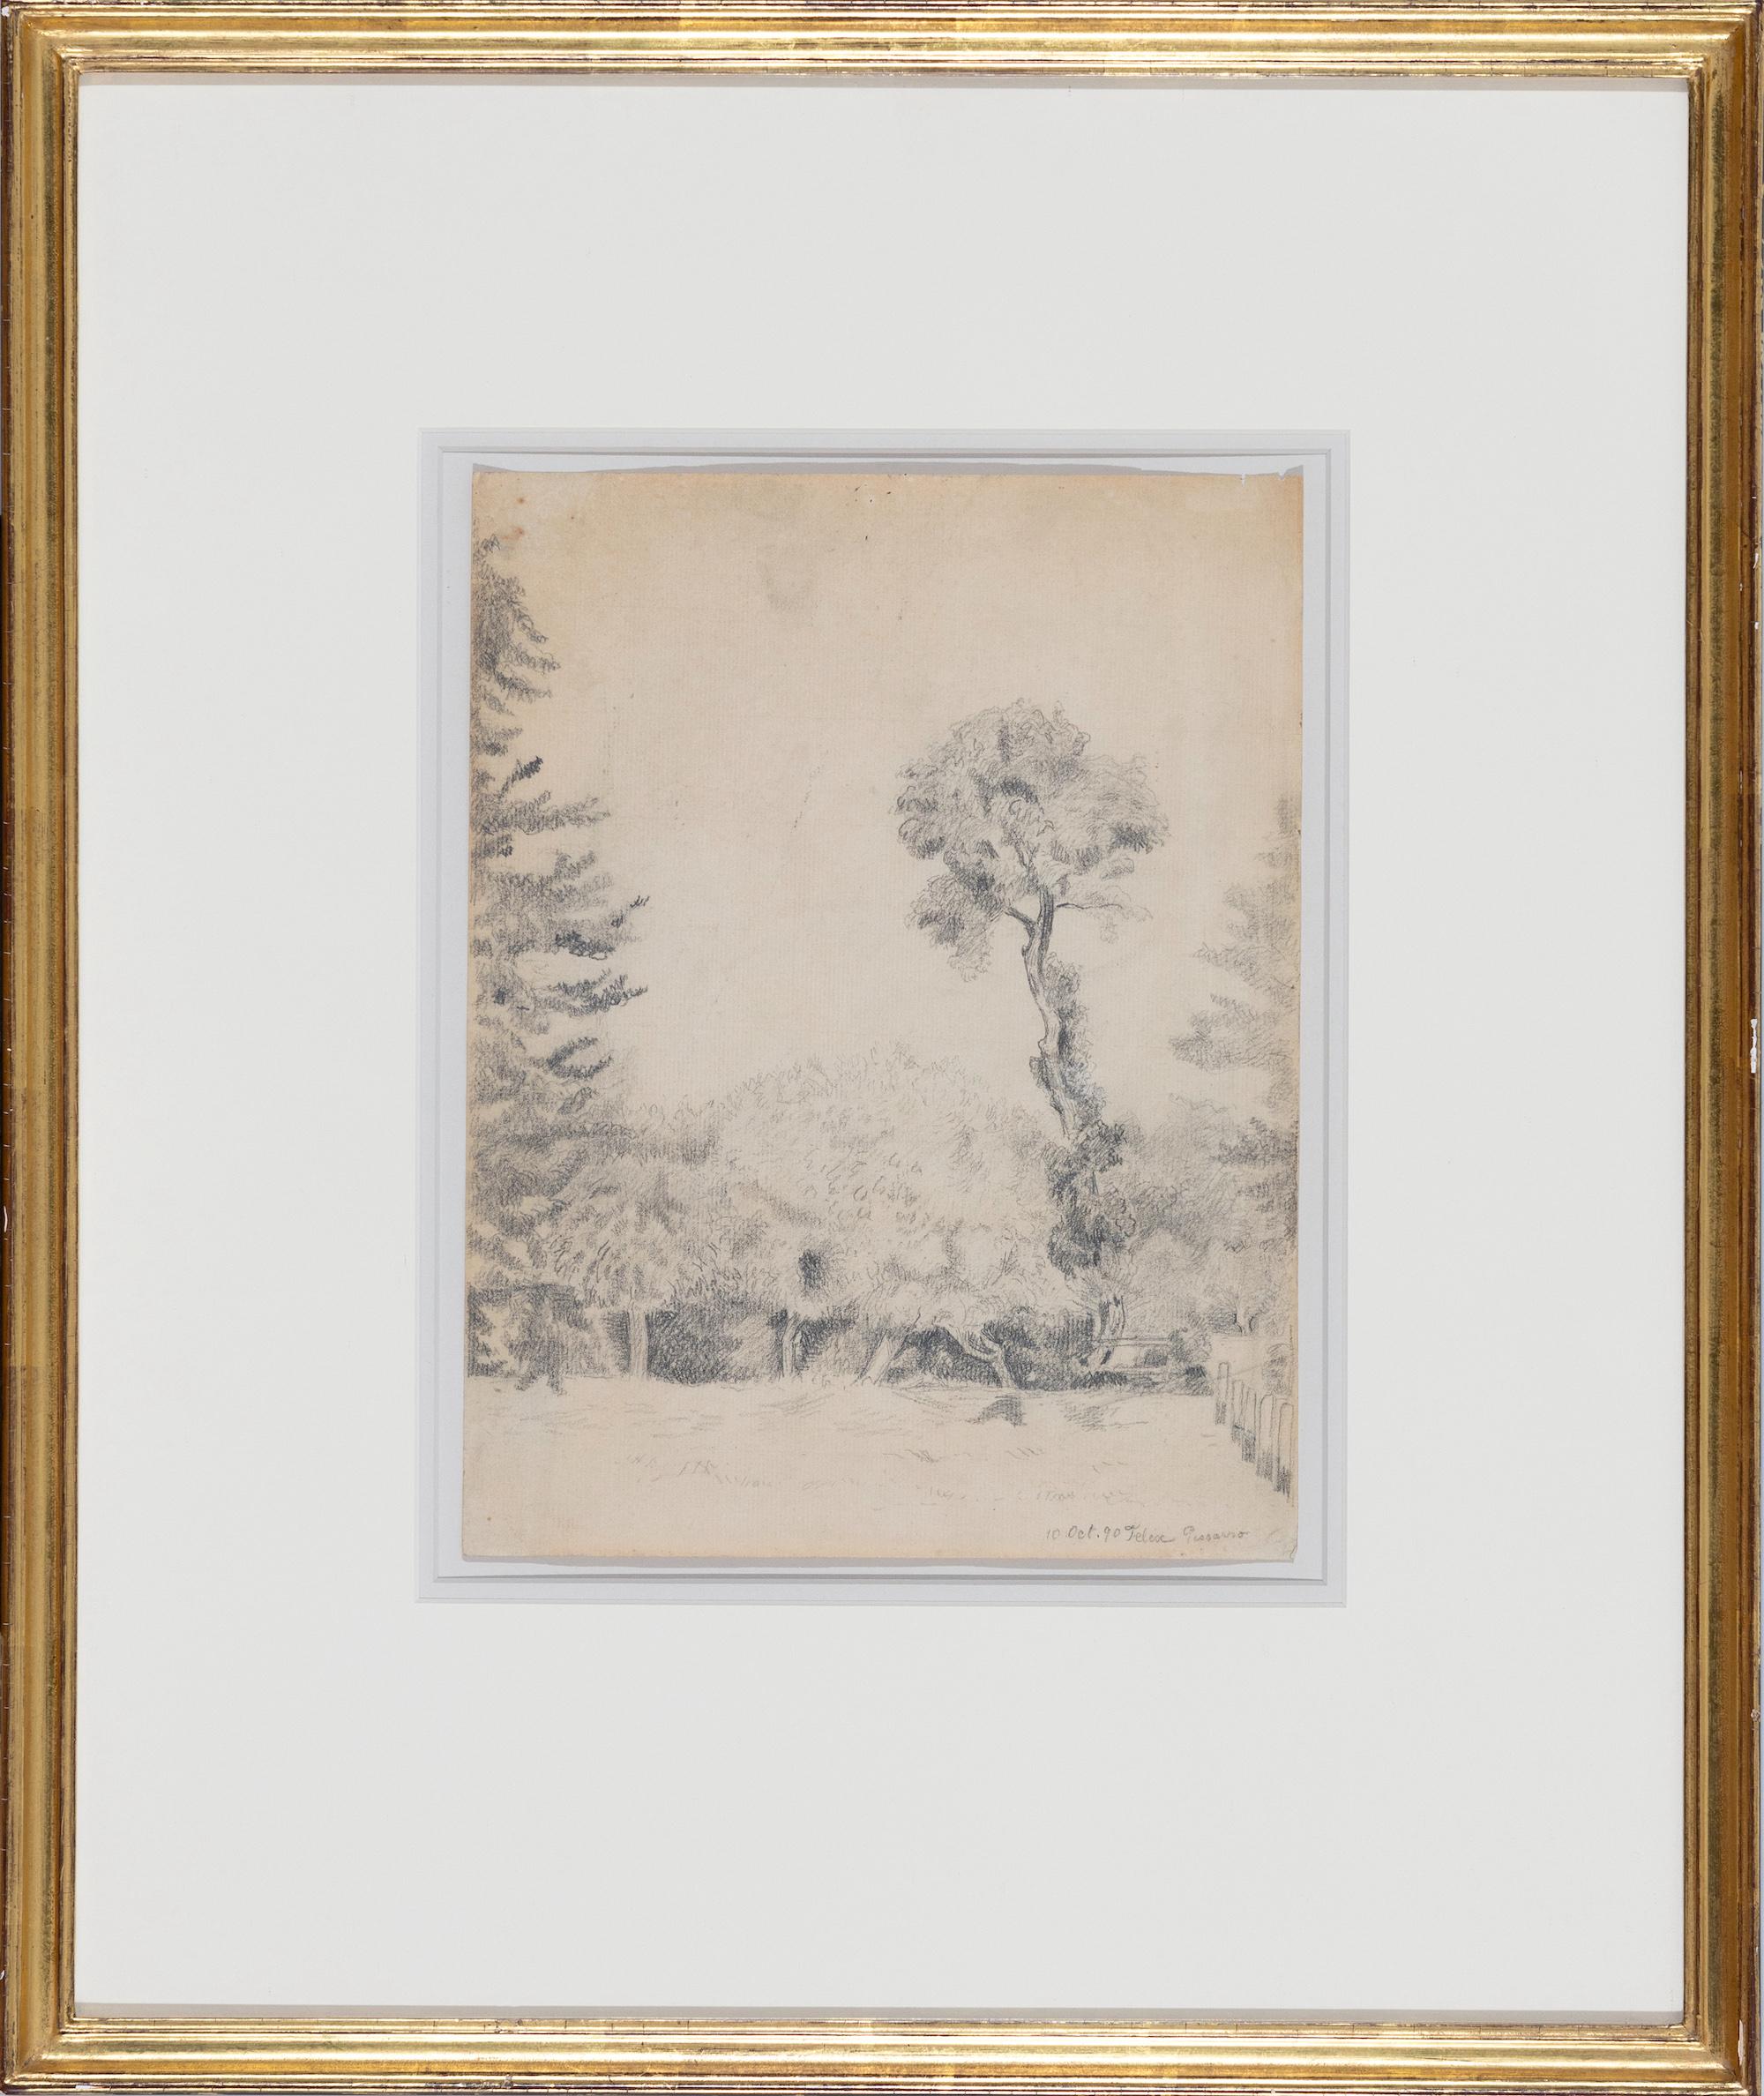 *UK BUYERS WILL PAY AN ADDITIONAL 20% VAT ON TOP OF THE ABOVE PRICE 

Landscape with Trees by Félix Pissarro (1874-1897)
Pencil on paper
29 x 22.5 cm (11 ⅜ x 8 ¾ inches)
Signed & dated lower right, 10 October 1890 Félix Pissarro

This is a very rare